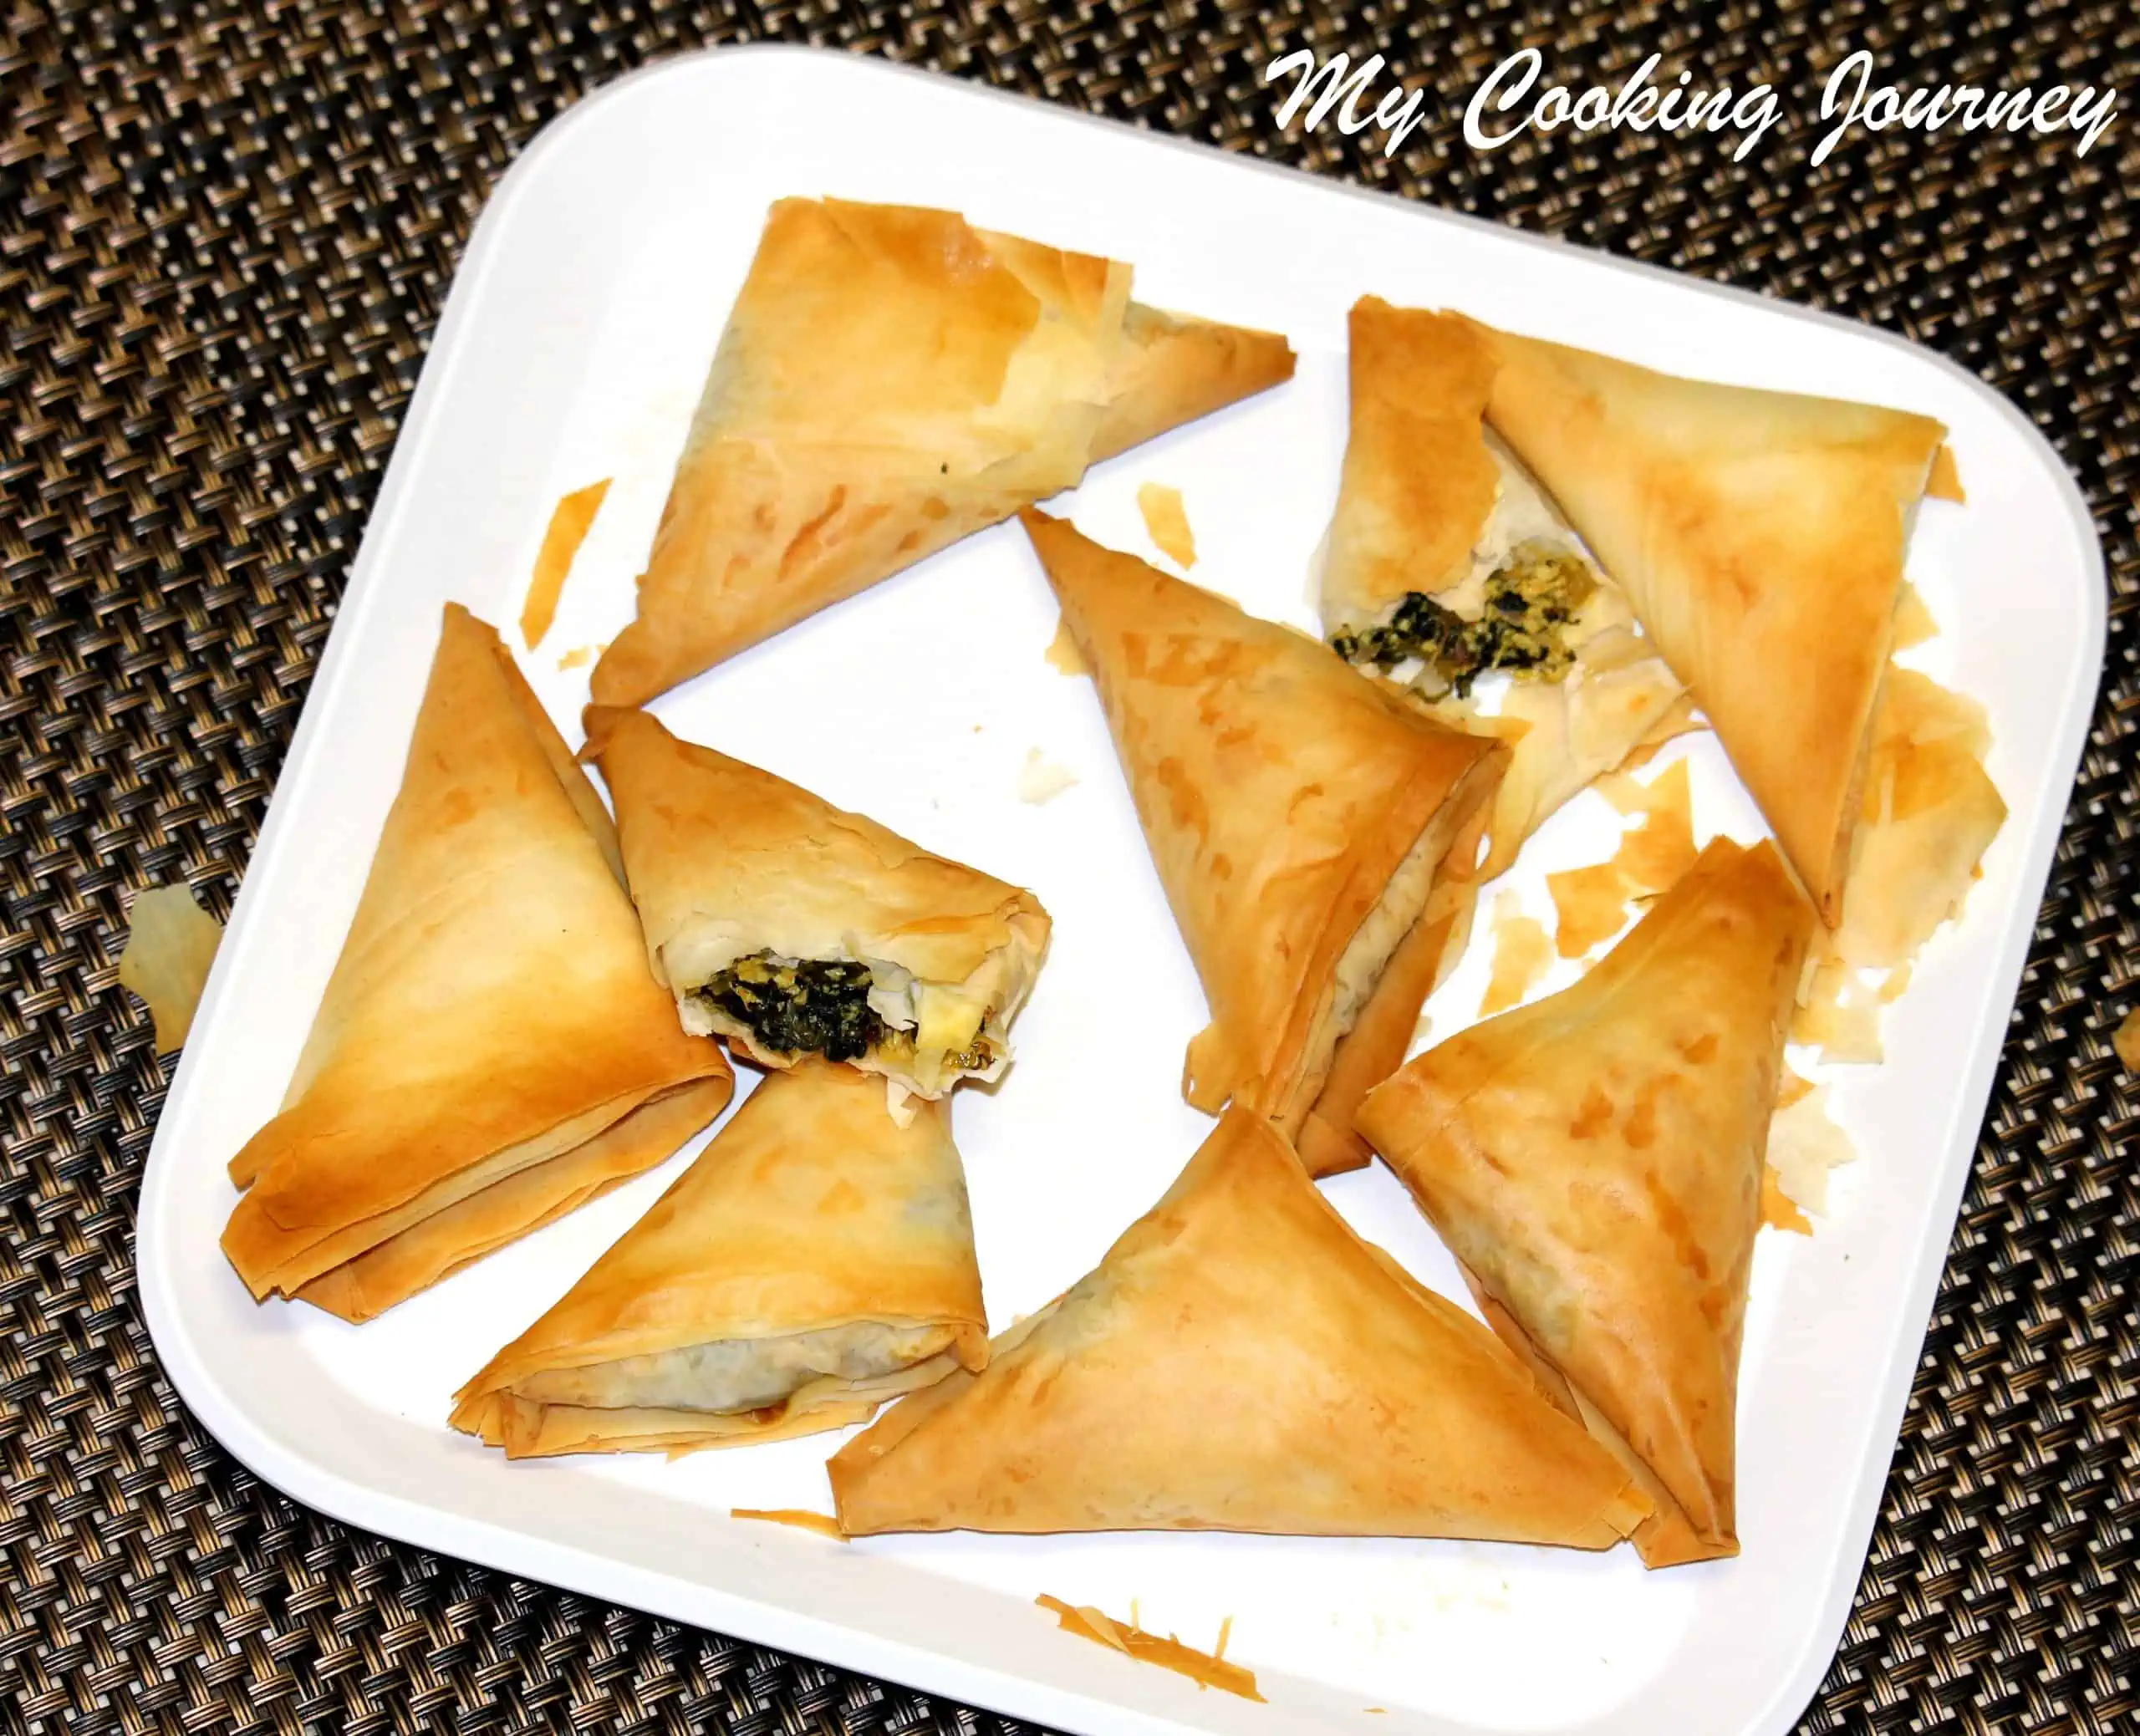 Baked Spinach and Paneer Samosa - Top View